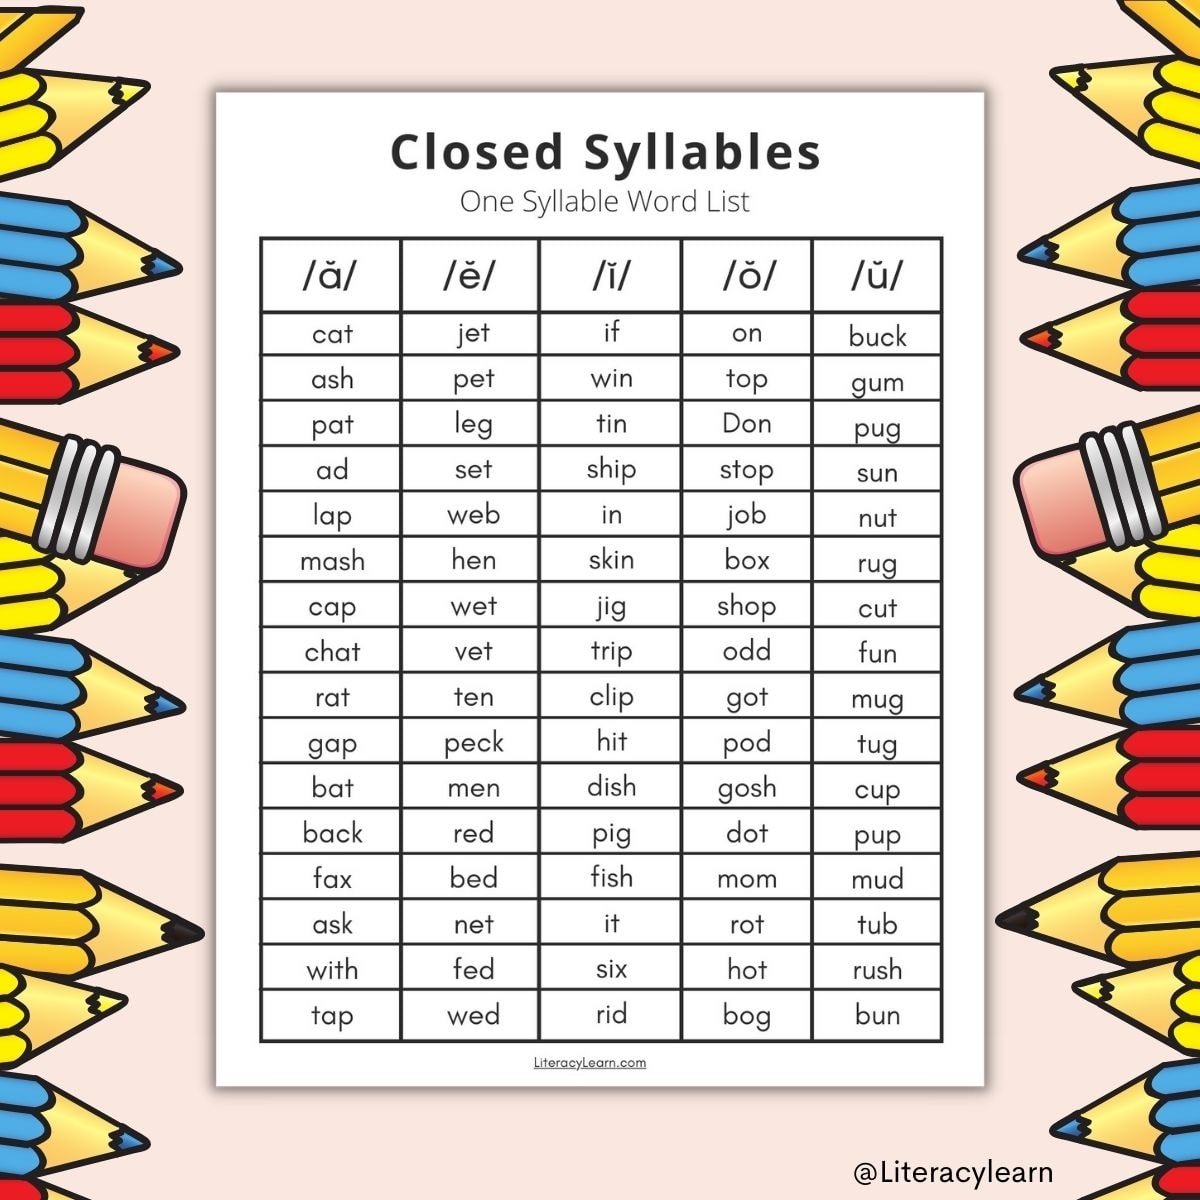 Image with closed syllables list centered with pencil graphics on the left and right.